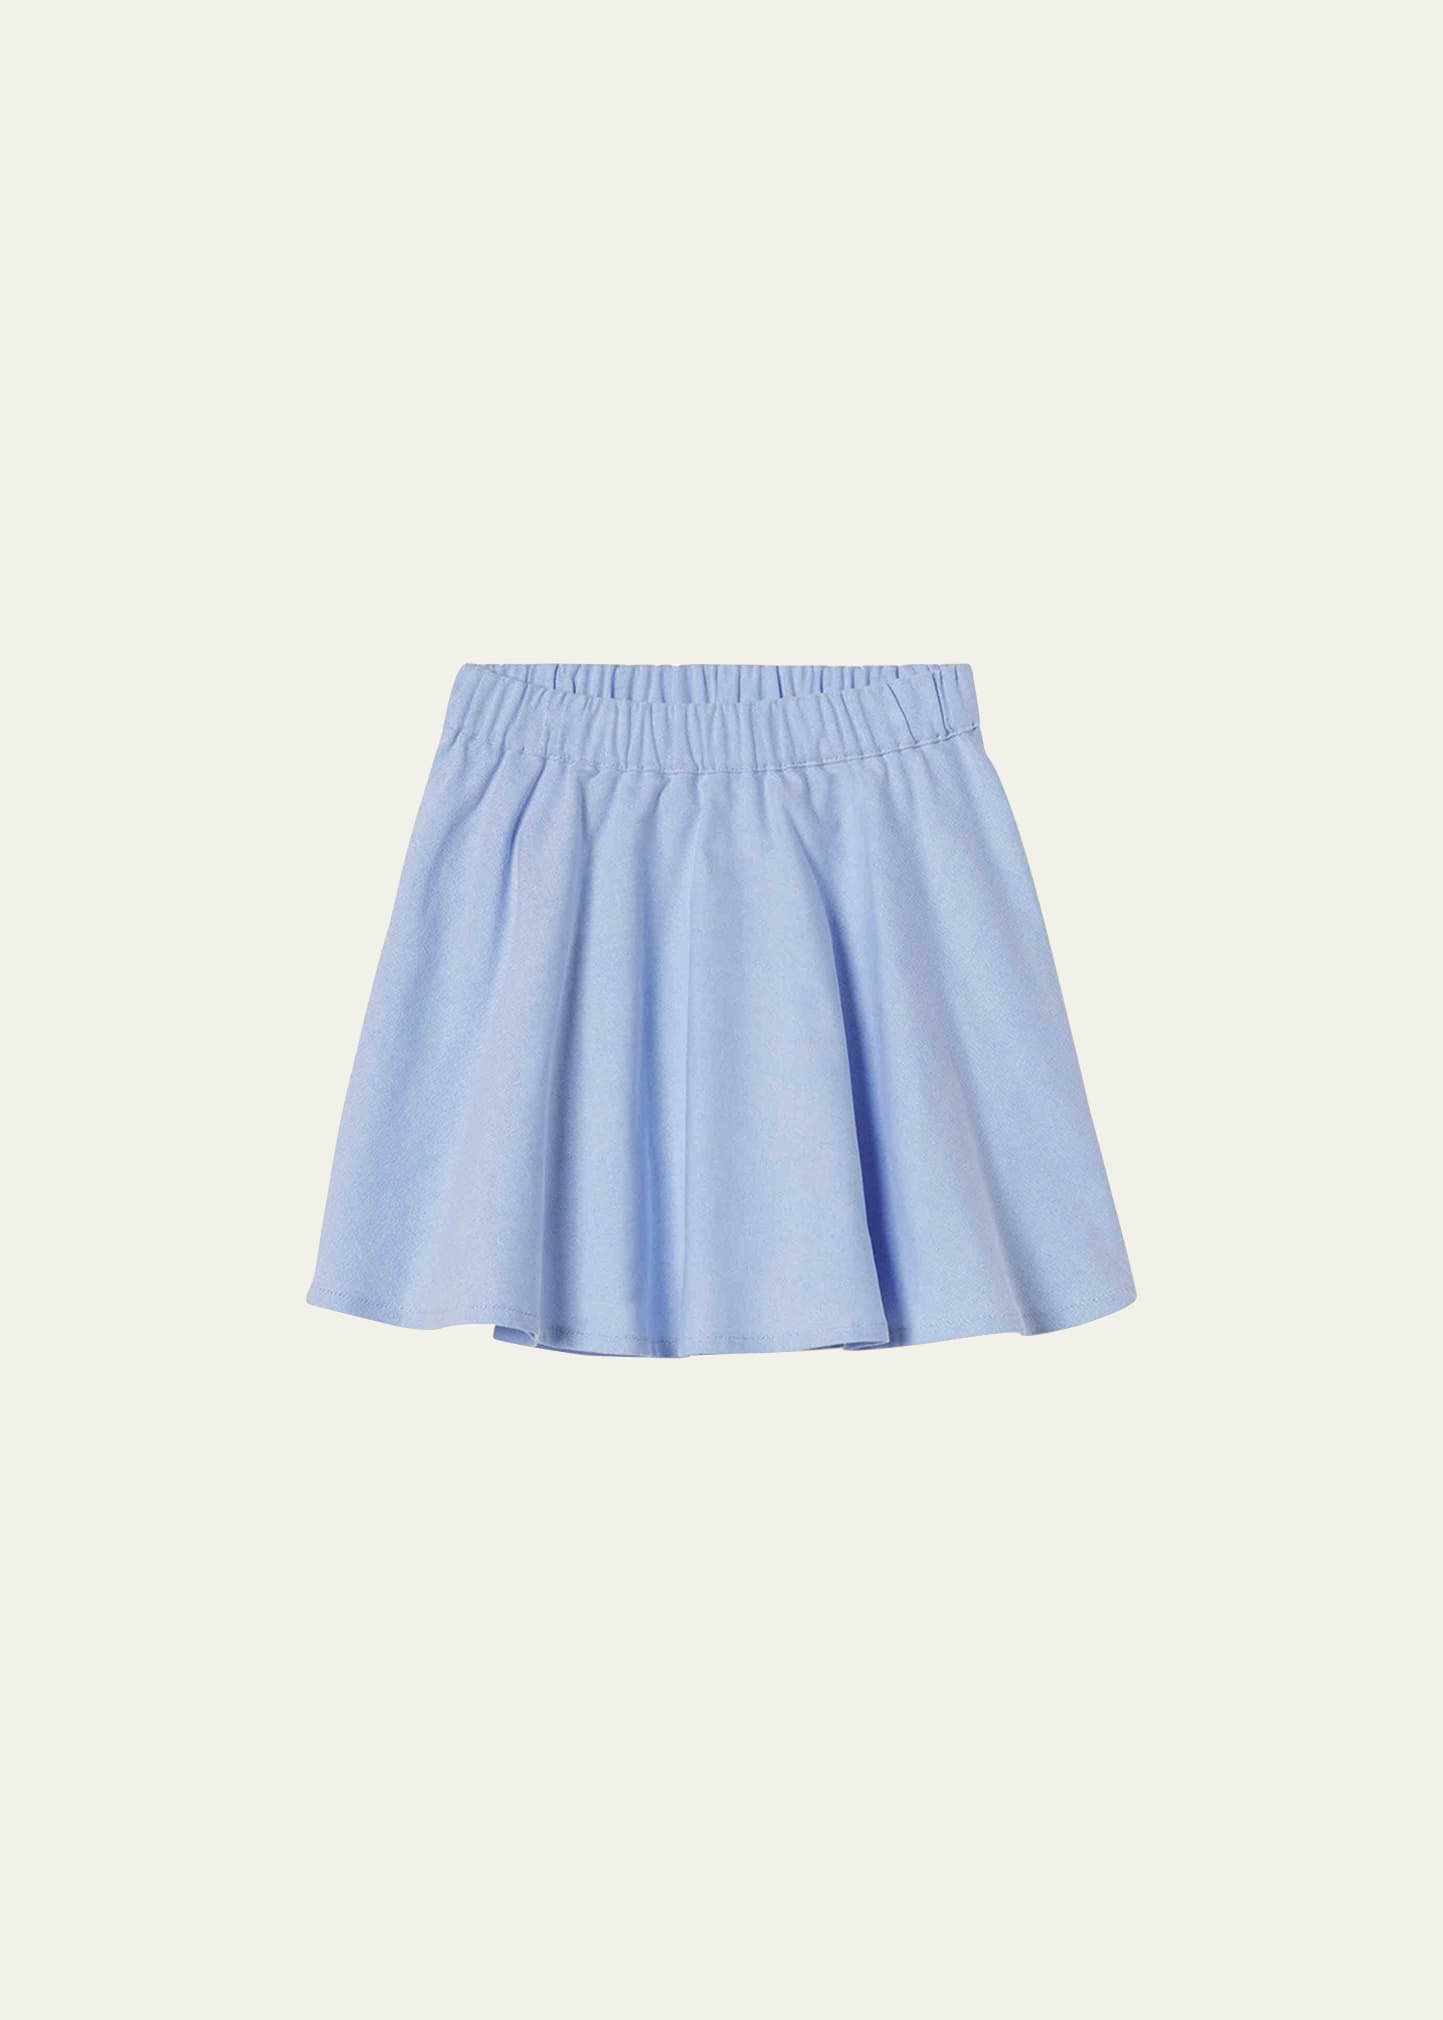 Girl's Sabrina Skirt - Solid Oxford, Size XS-XL